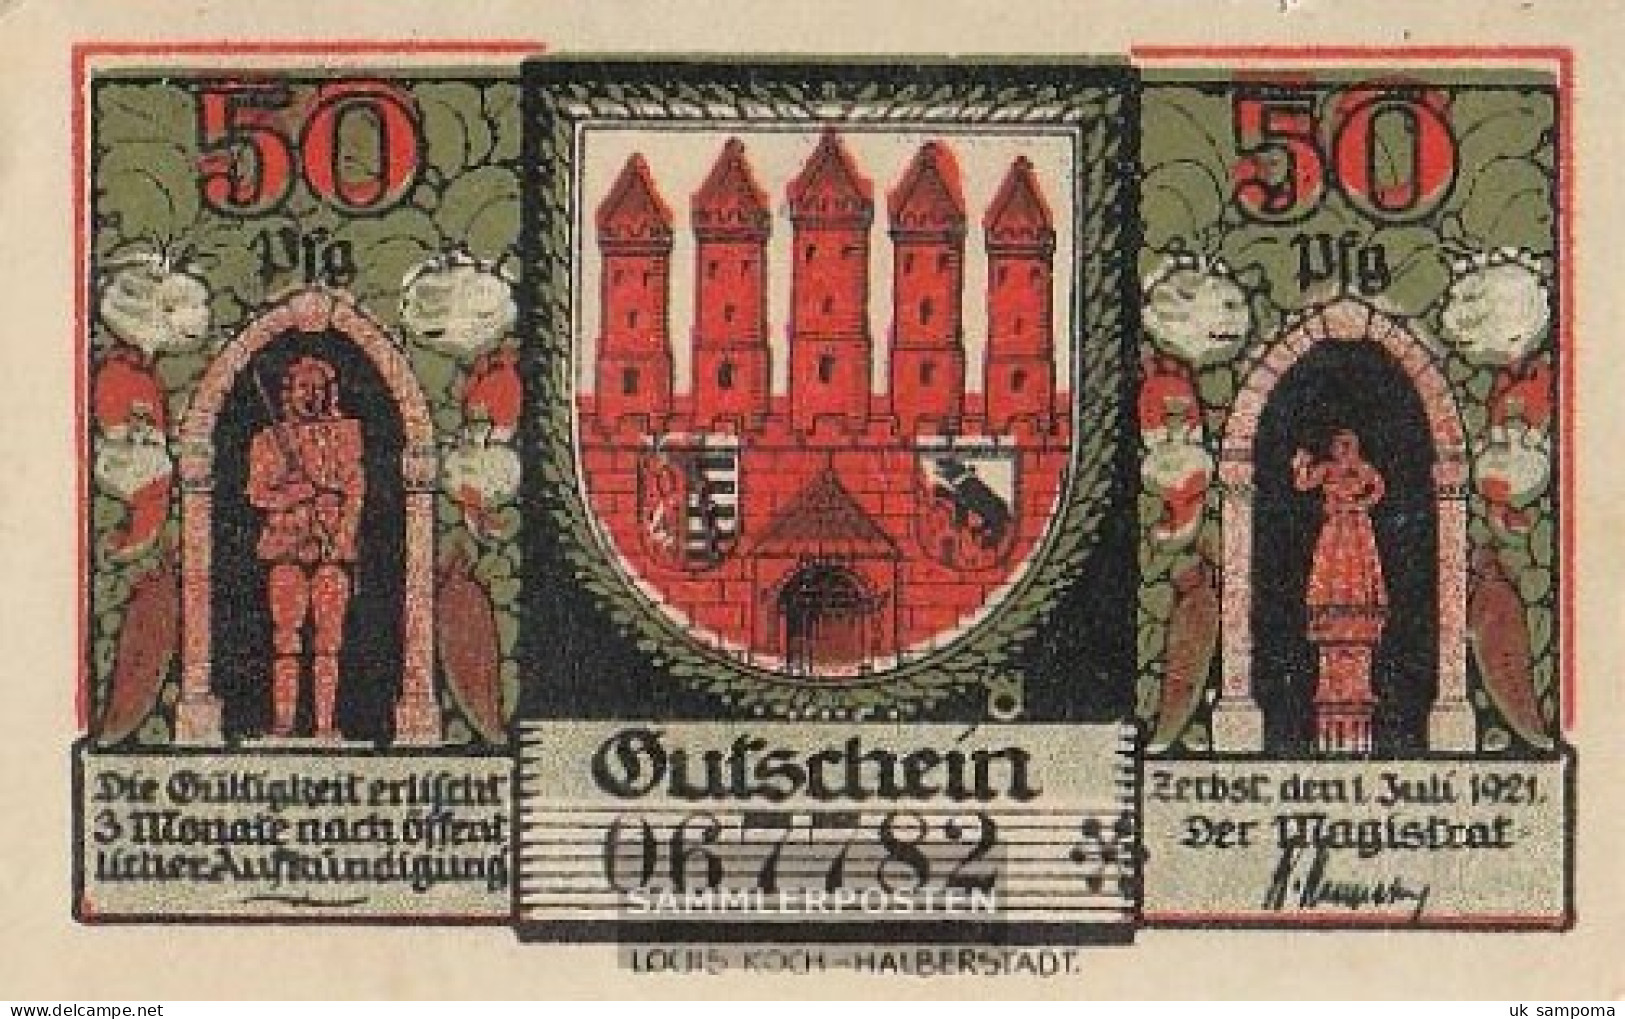 Zerbst/Evidence Notgeld: 1469.2 50 PF Notgeld The City Zerbst/Evidence Uncirculated 1921 50 Pfennig - [11] Local Banknote Issues